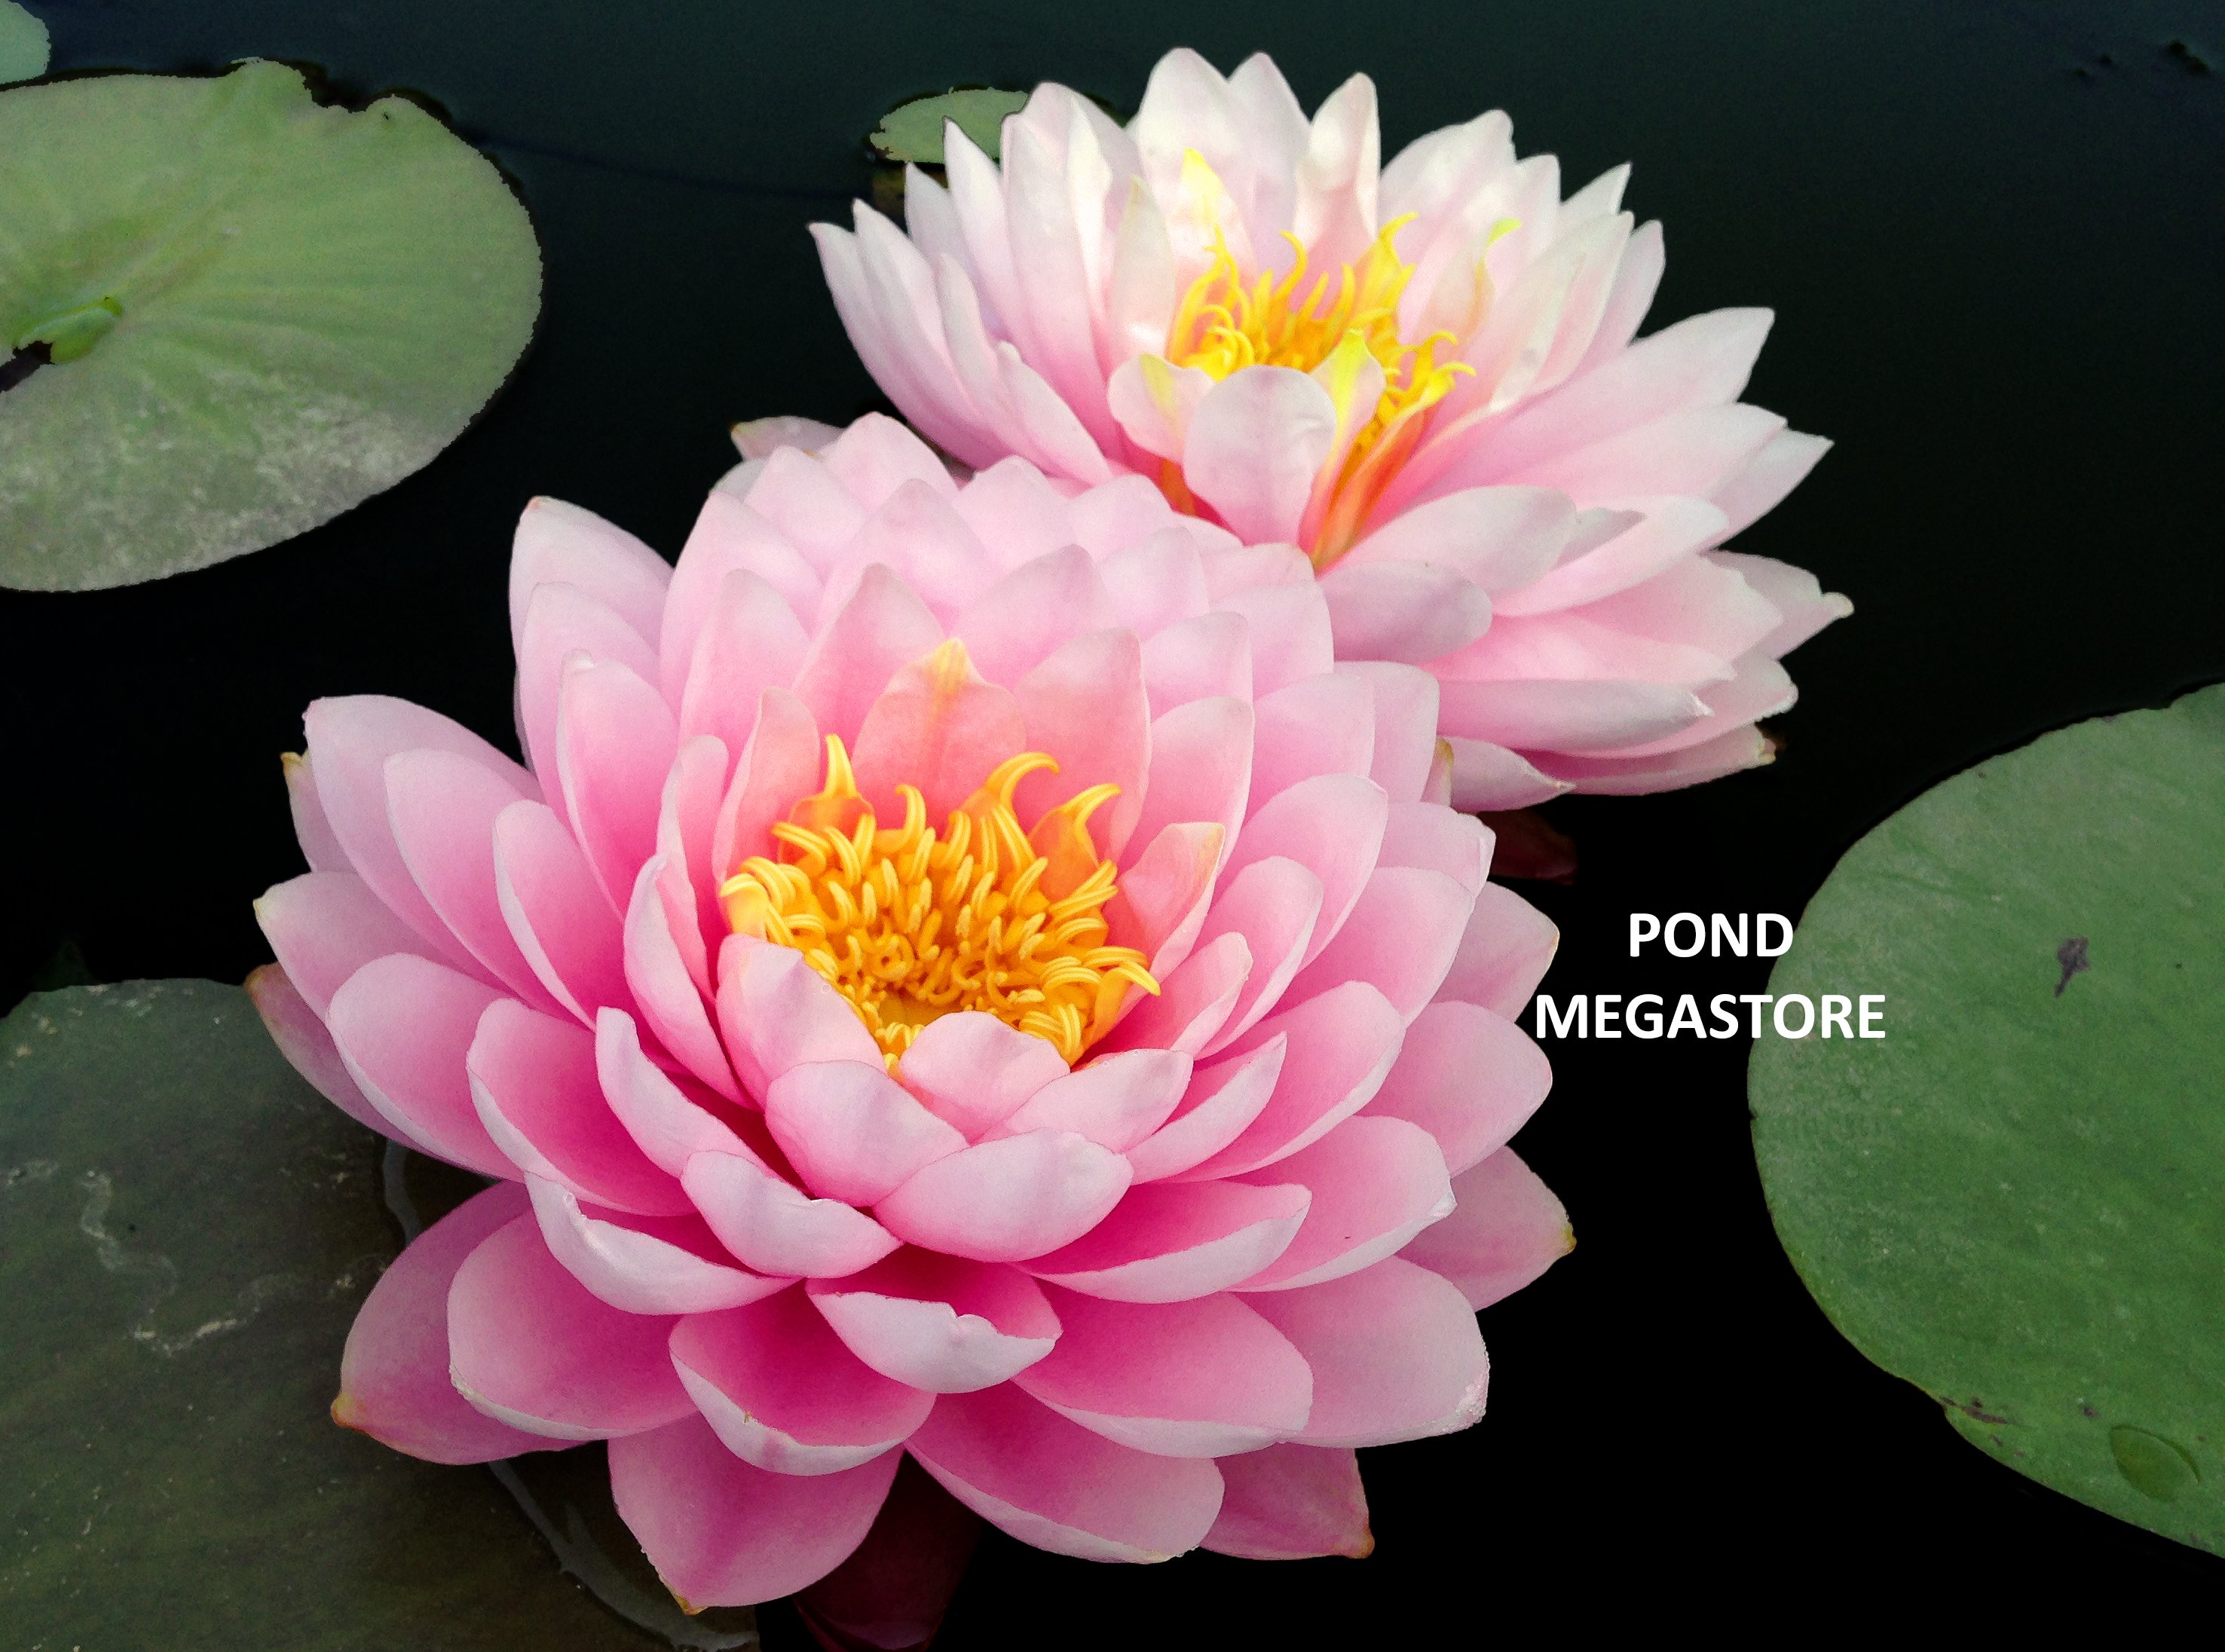 Winter Cold Hardy Water Lily Flowers, Buy Water Lily Plants ...